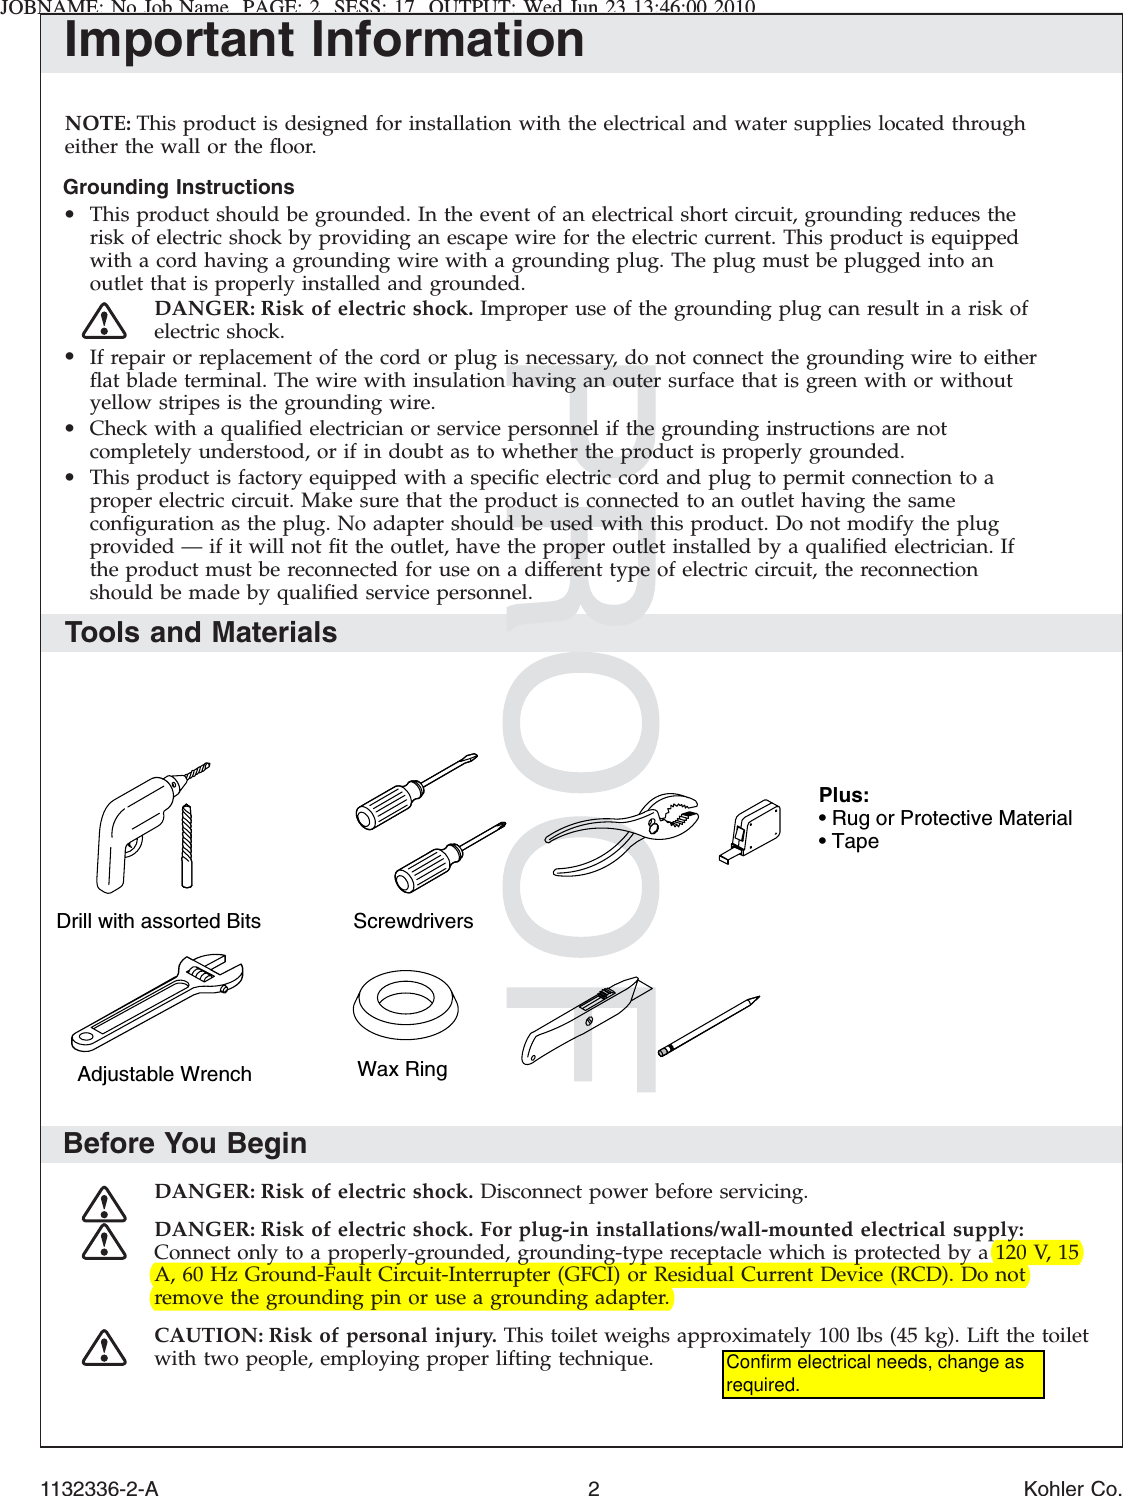 JOBNAME: No Job Name PAGE: 2 SESS: 17 OUTPUT: Wed Jun 23 13:46:00 2010Important InformationNOTE: This product is designed for installation with the electrical and water supplies located througheither the wall or the ﬂoor.Grounding Instructions•This product should be grounded. In the event of an electrical short circuit, grounding reduces therisk of electric shock by providing an escape wire for the electric current. This product is equippedwith a cord having a grounding wire with a grounding plug. The plug must be plugged into anoutlet that is properly installed and grounded.DANGER: Risk of electric shock. Improper use of the grounding plug can result in a risk ofelectric shock.•If repair or replacement of the cord or plug is necessary, do not connect the grounding wire to eitherﬂat blade terminal. The wire with insulation having an outer surface that is green with or withoutyellow stripes is the grounding wire.•Check with a qualiﬁed electrician or service personnel if the grounding instructions are notcompletely understood, or if in doubt as to whether the product is properly grounded.•This product is factory equipped with a speciﬁc electric cord and plug to permit connection to aproper electric circuit. Make sure that the product is connected to an outlet having the sameconﬁguration as the plug. No adapter should be used with this product. Do not modify the plugprovided — if it will not ﬁt the outlet, have the proper outlet installed by a qualiﬁed electrician. Ifthe product must be reconnected for use on a different type of electric circuit, the reconnectionshould be made by qualiﬁed service personnel.Tools and MaterialsBefore You BeginDANGER: Risk of electric shock. Disconnect power before servicing.DANGER: Risk of electric shock. For plug-in installations/wall-mounted electrical supply:Connect only to a properly-grounded, grounding-type receptacle which is protected by a 120 V, 15A, 60 Hz Ground-Fault Circuit-Interrupter (GFCI) or Residual Current Device (RCD). Do notremove the grounding pin or use a grounding adapter.CAUTION: Risk of personal injury. This toilet weighs approximately 100 lbs (45 kg). Lift the toiletwith two people, employing proper lifting technique.Drill with assorted Bits ScrewdriversWax RingAdjustable WrenchPlus:• Rug or Protective Material• Tape1132336-2-A 2 Kohler Co.Confirm electrical needs, change as required.